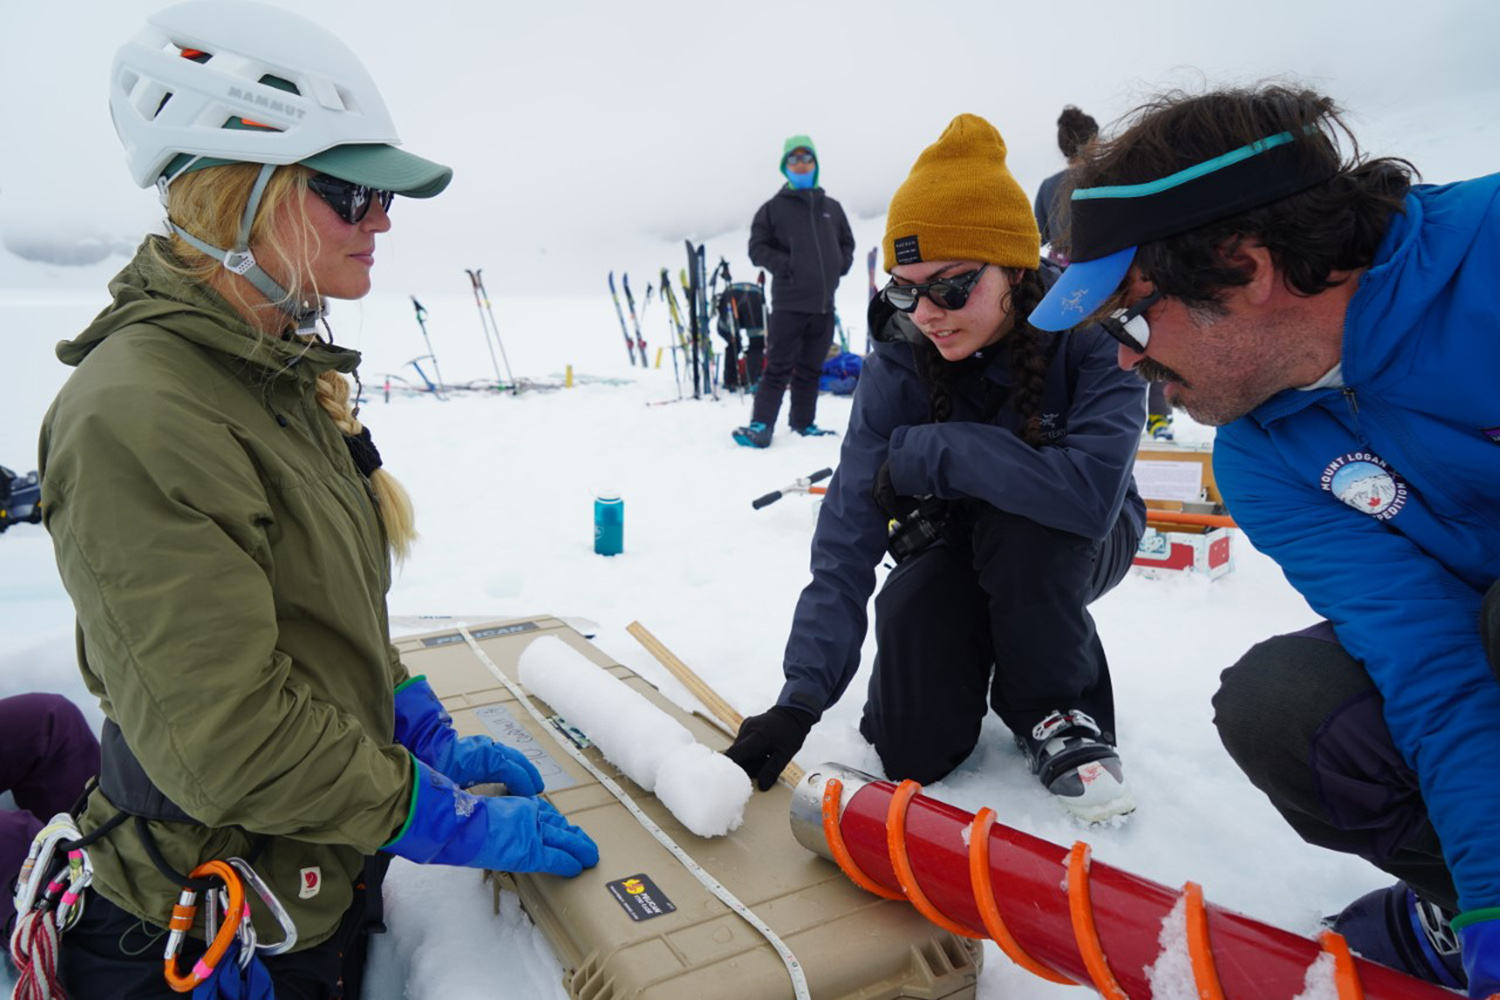 Students use snow coring equipment in Juneau Icefield.